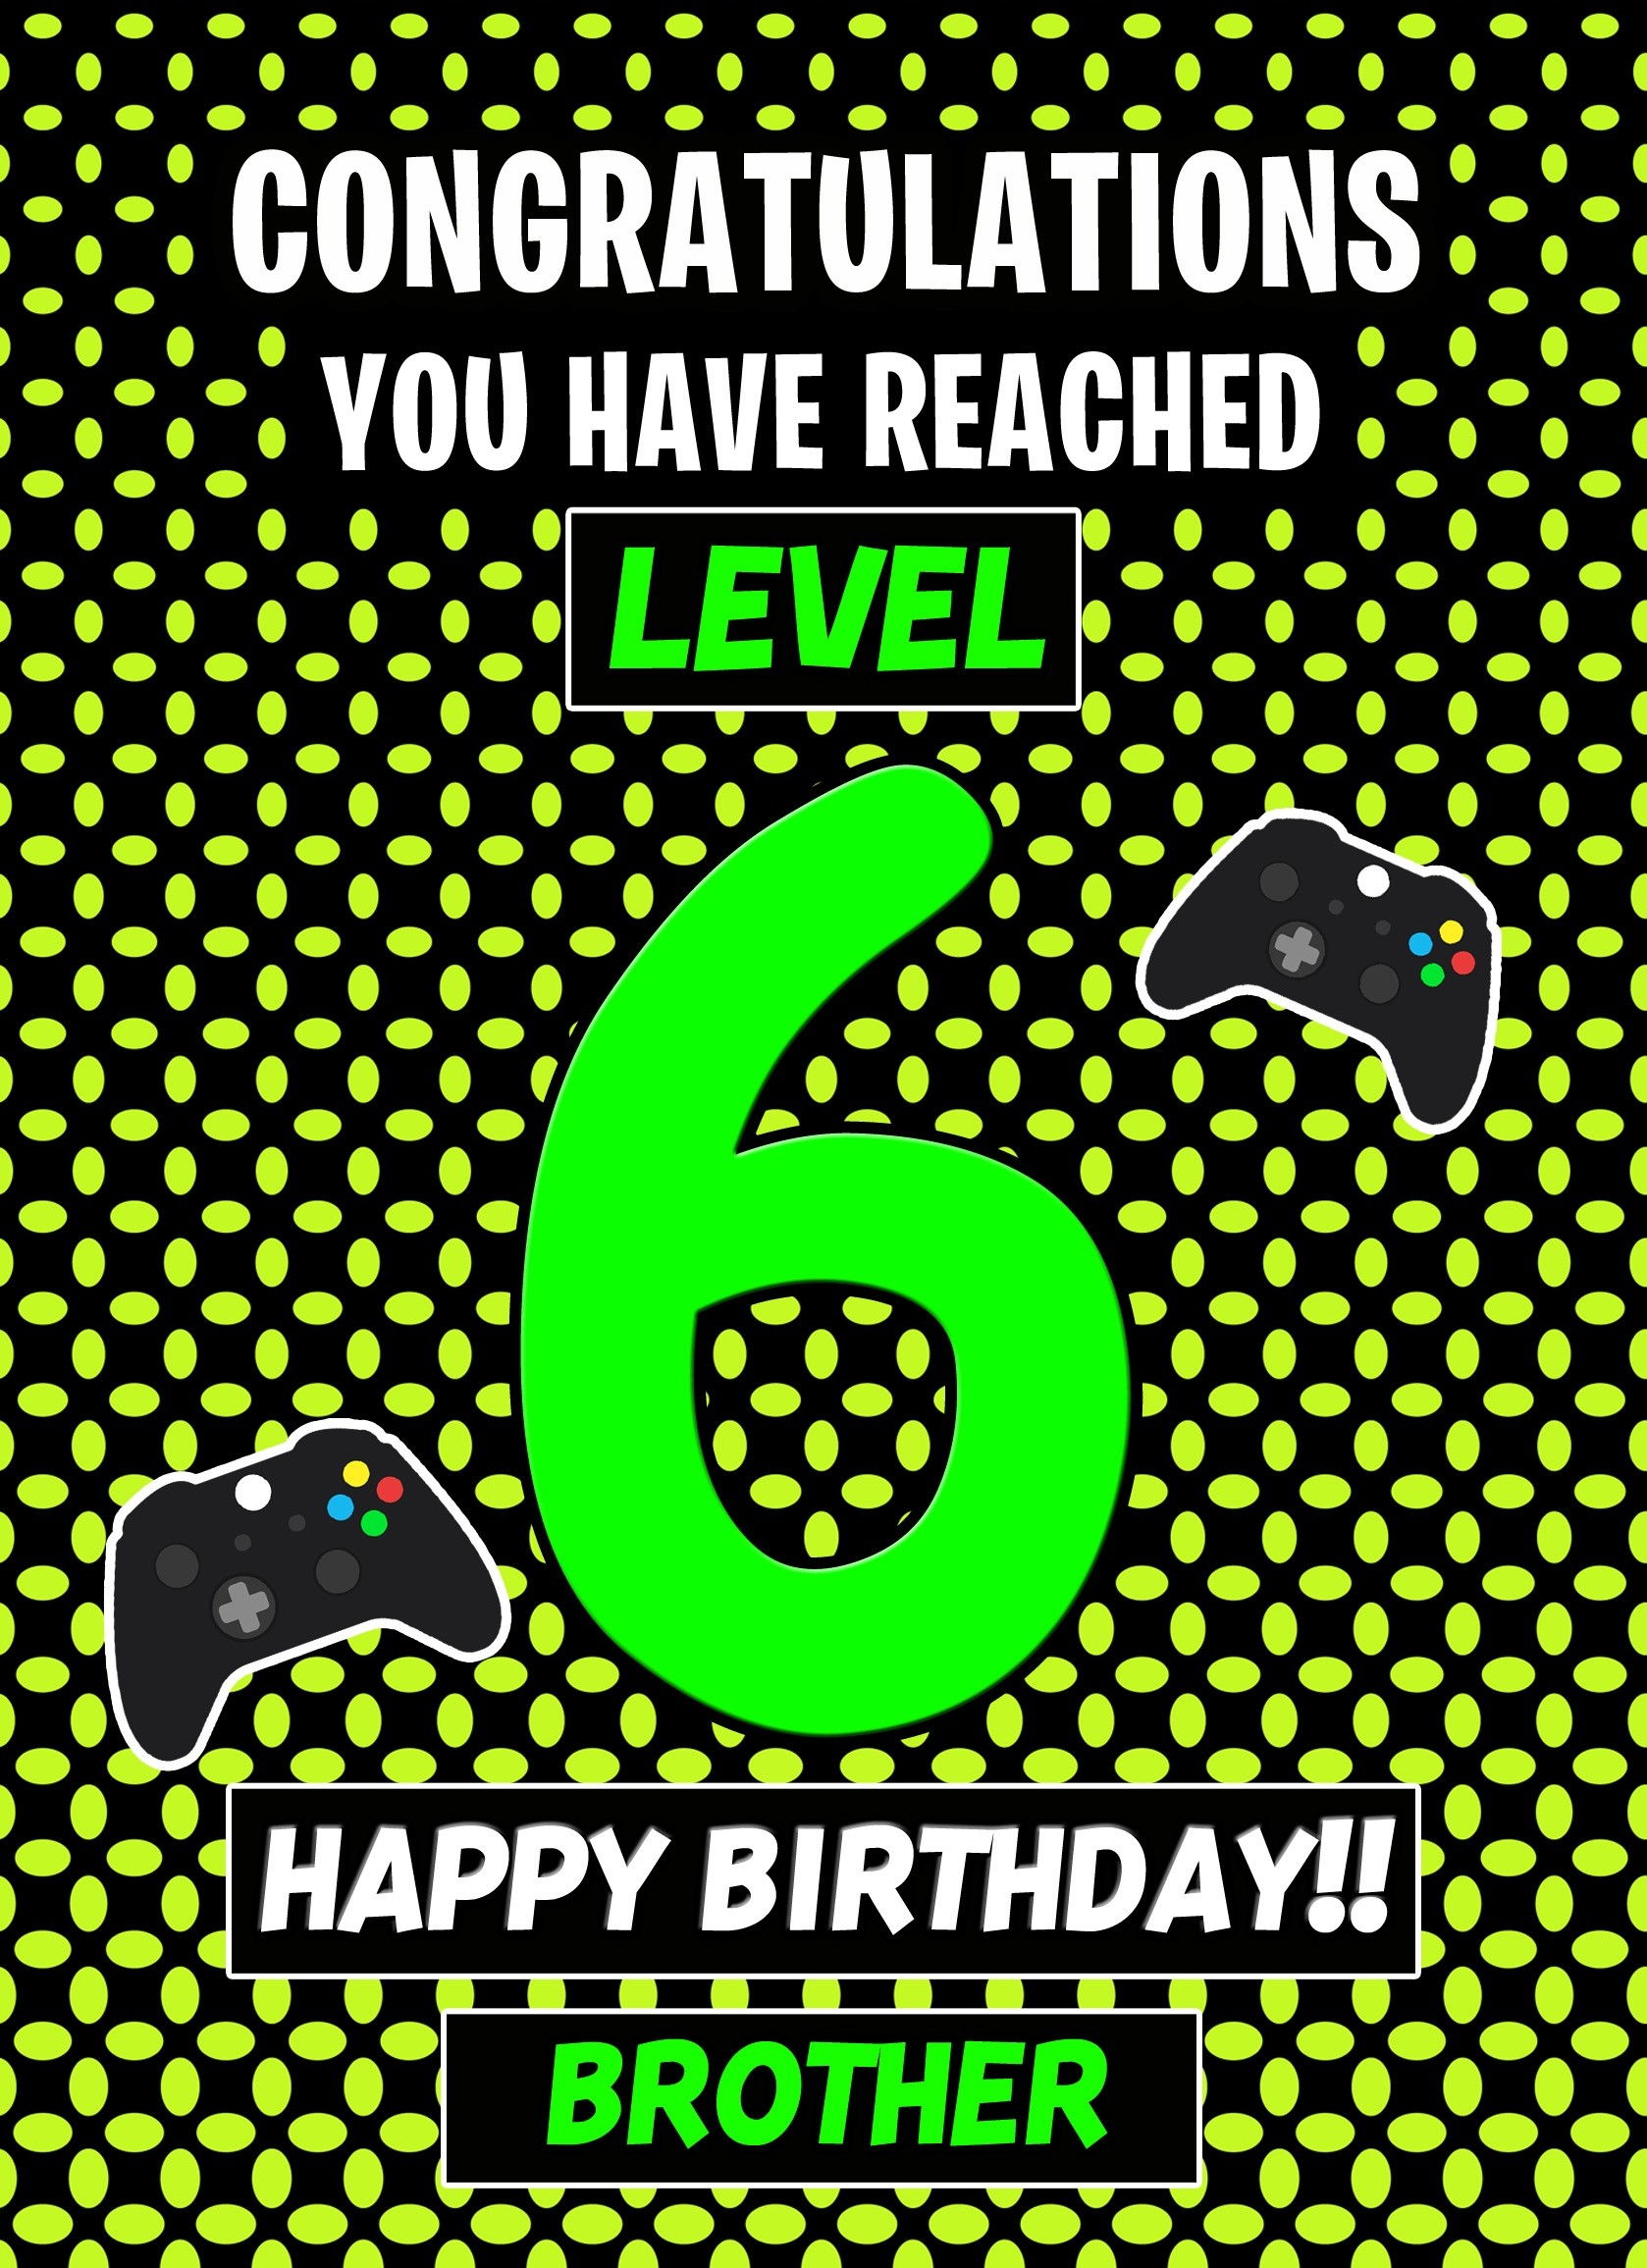 Brother 6th Birthday Card (Level Up Gamer)